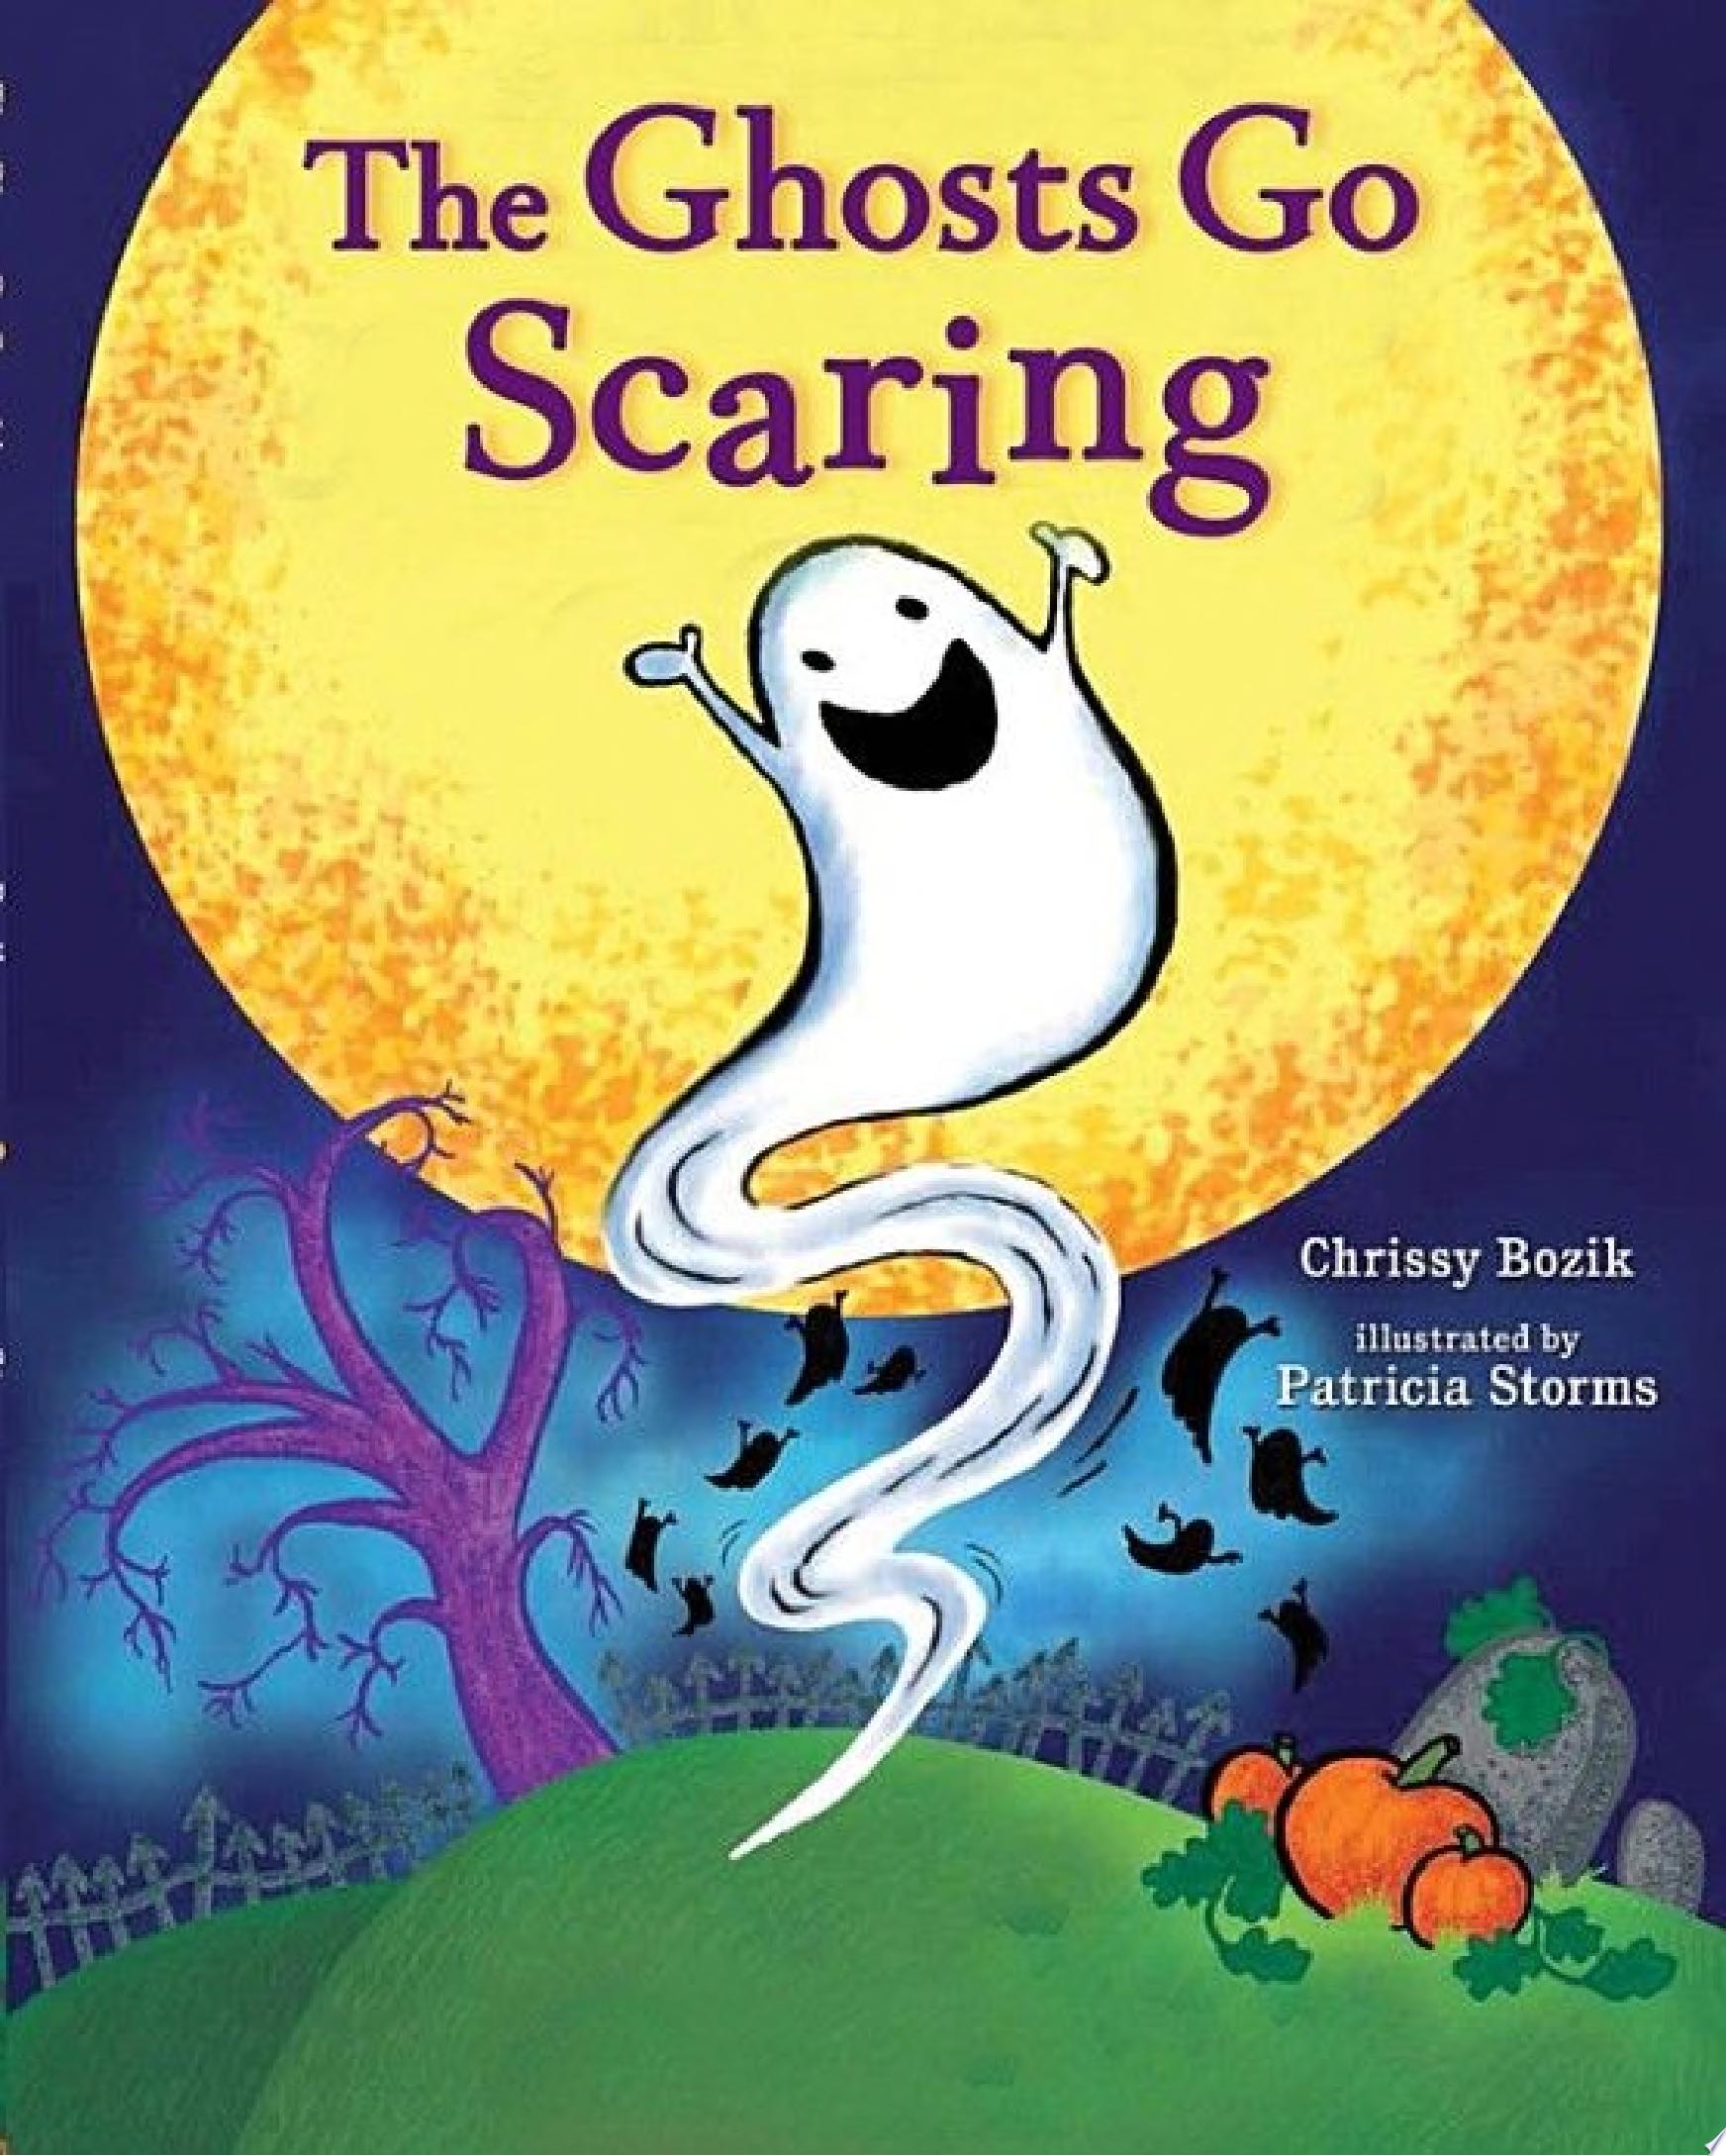 Image for "The Ghosts Go Scaring"